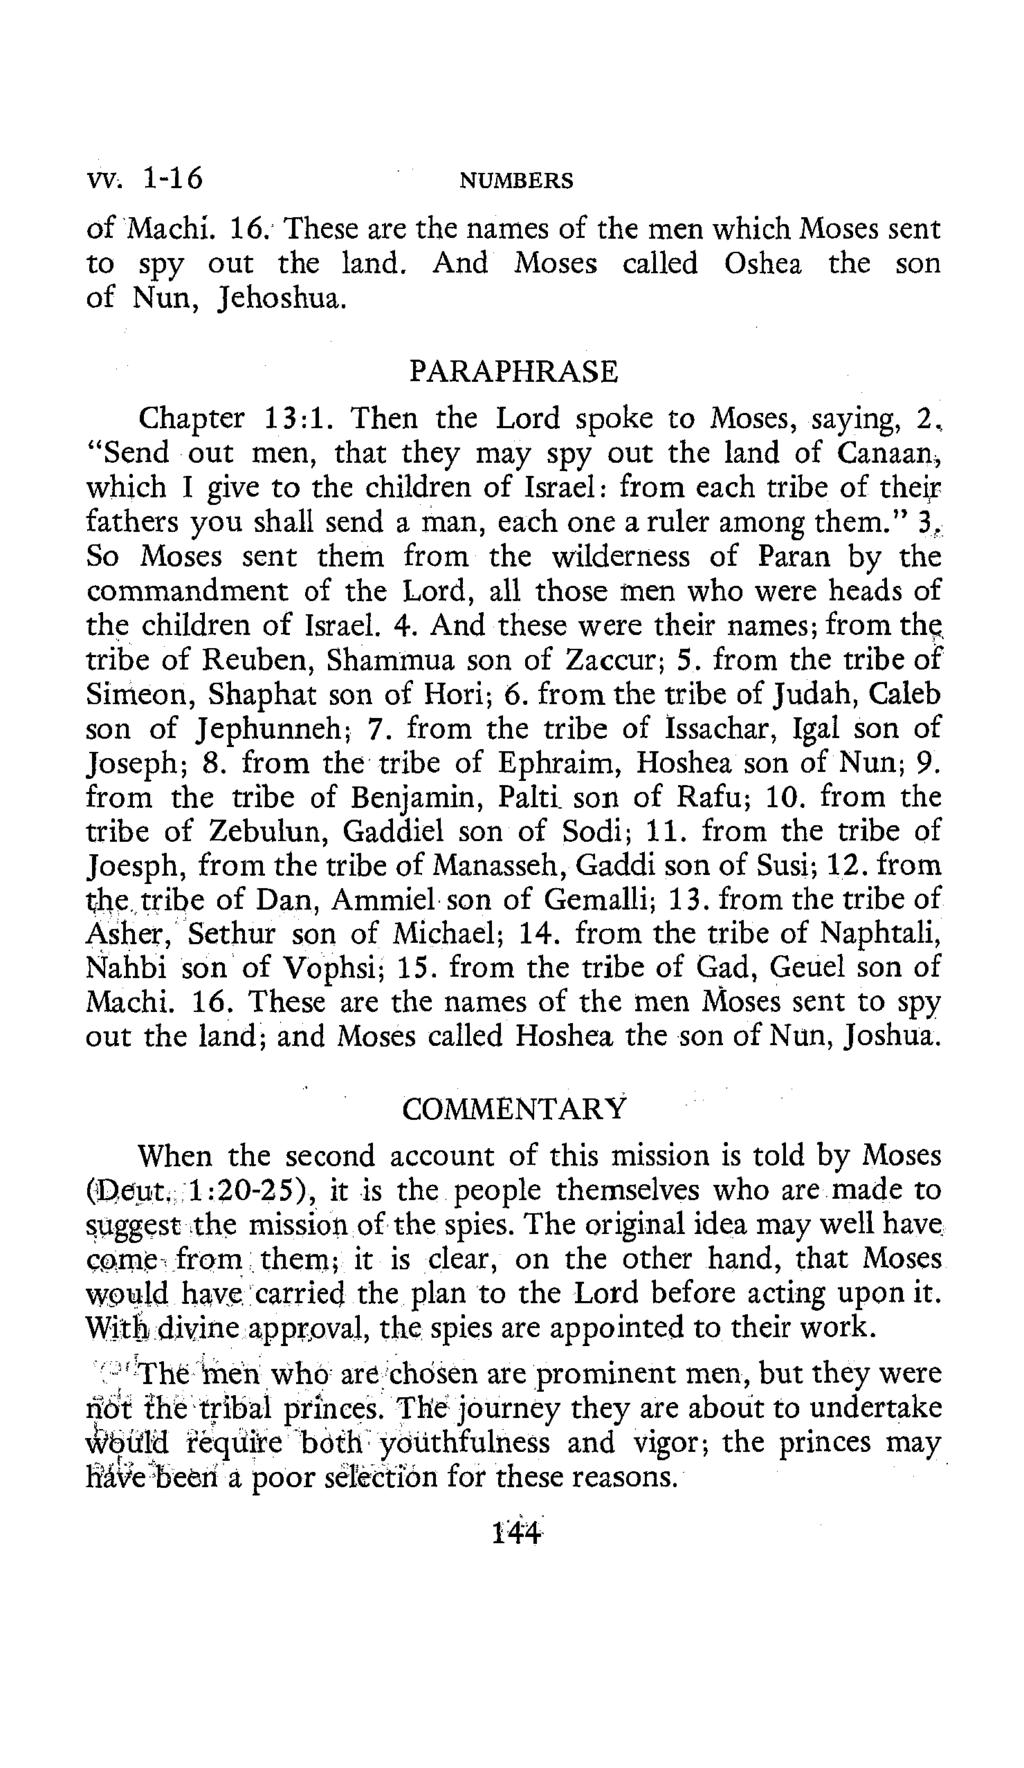 W. 1-16 NUMBERS of Machi. 16. These are the names of the men which Moses sent to spy out the land. And Moses called Oshea the son of Nun, Jehoshua. PARAPHRASE Chapter 13:l.